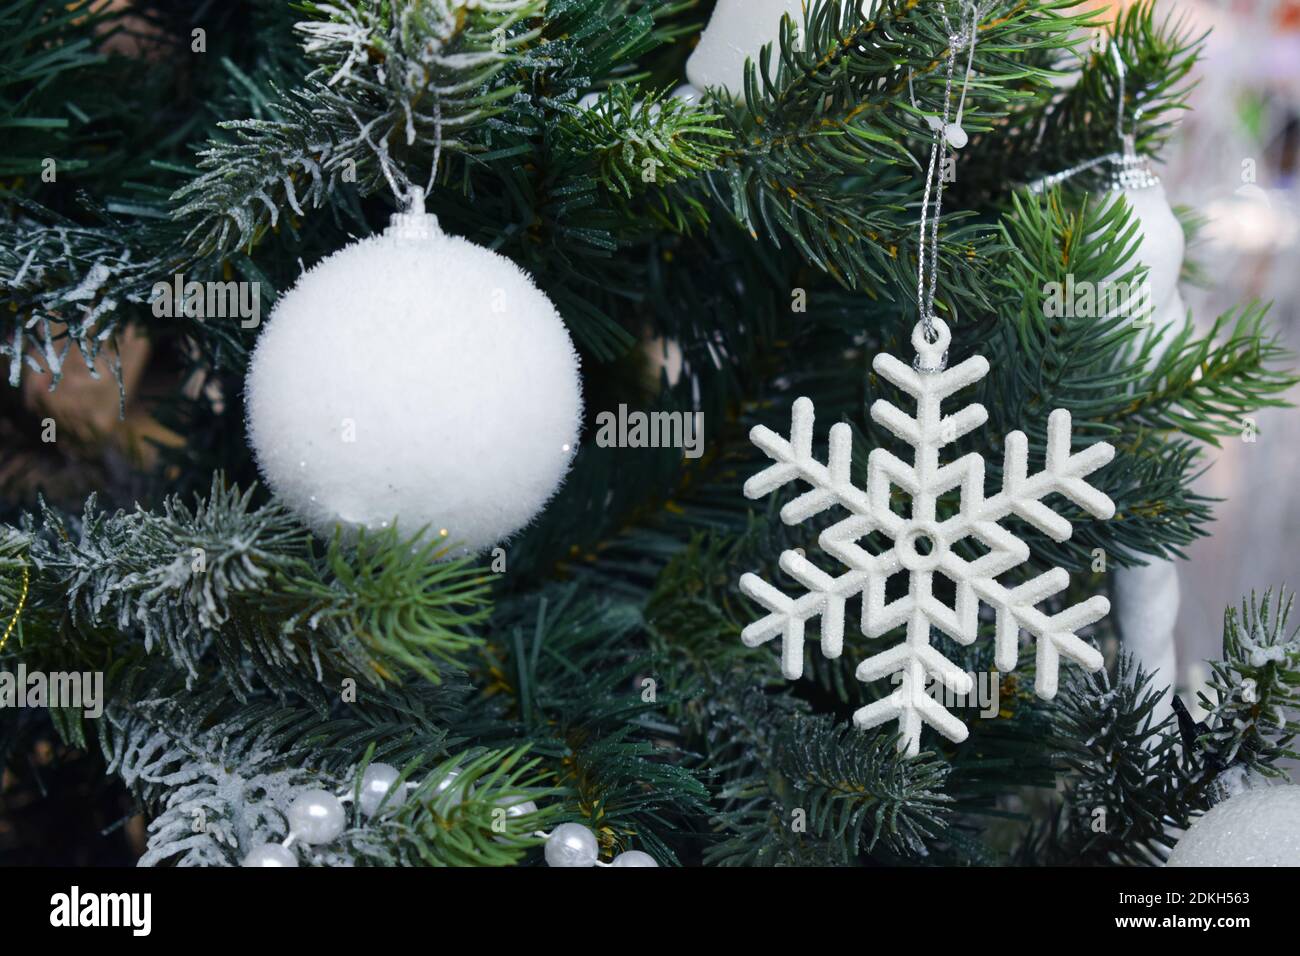 Christmas tree with decorations, balls, stars and garlands. Christmas background Stock Photo